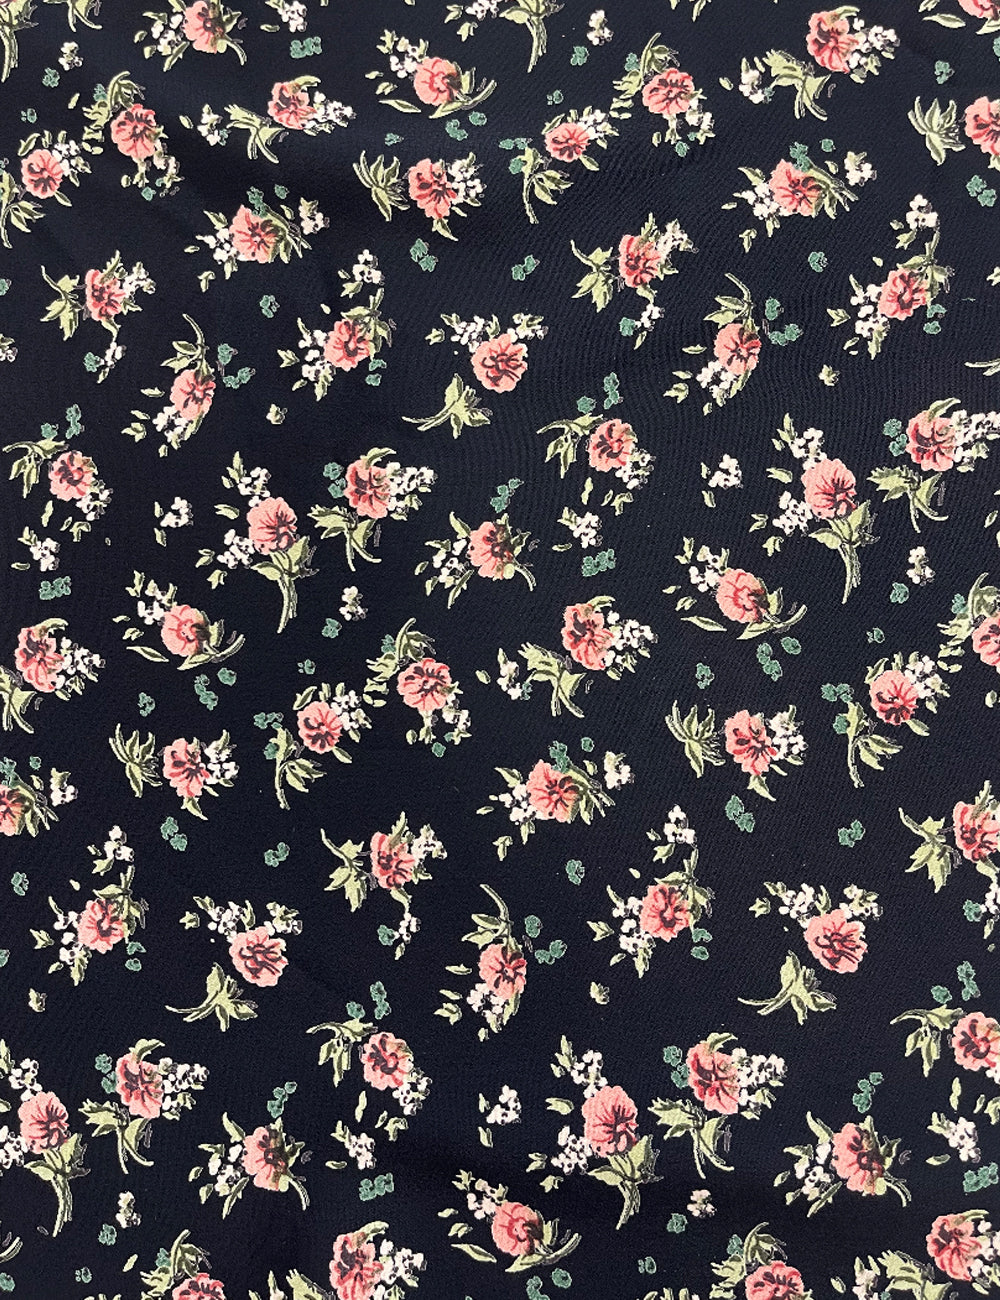 Black & Pink Sweet Corsage Floral Fabric - 1 & 2/3 yds